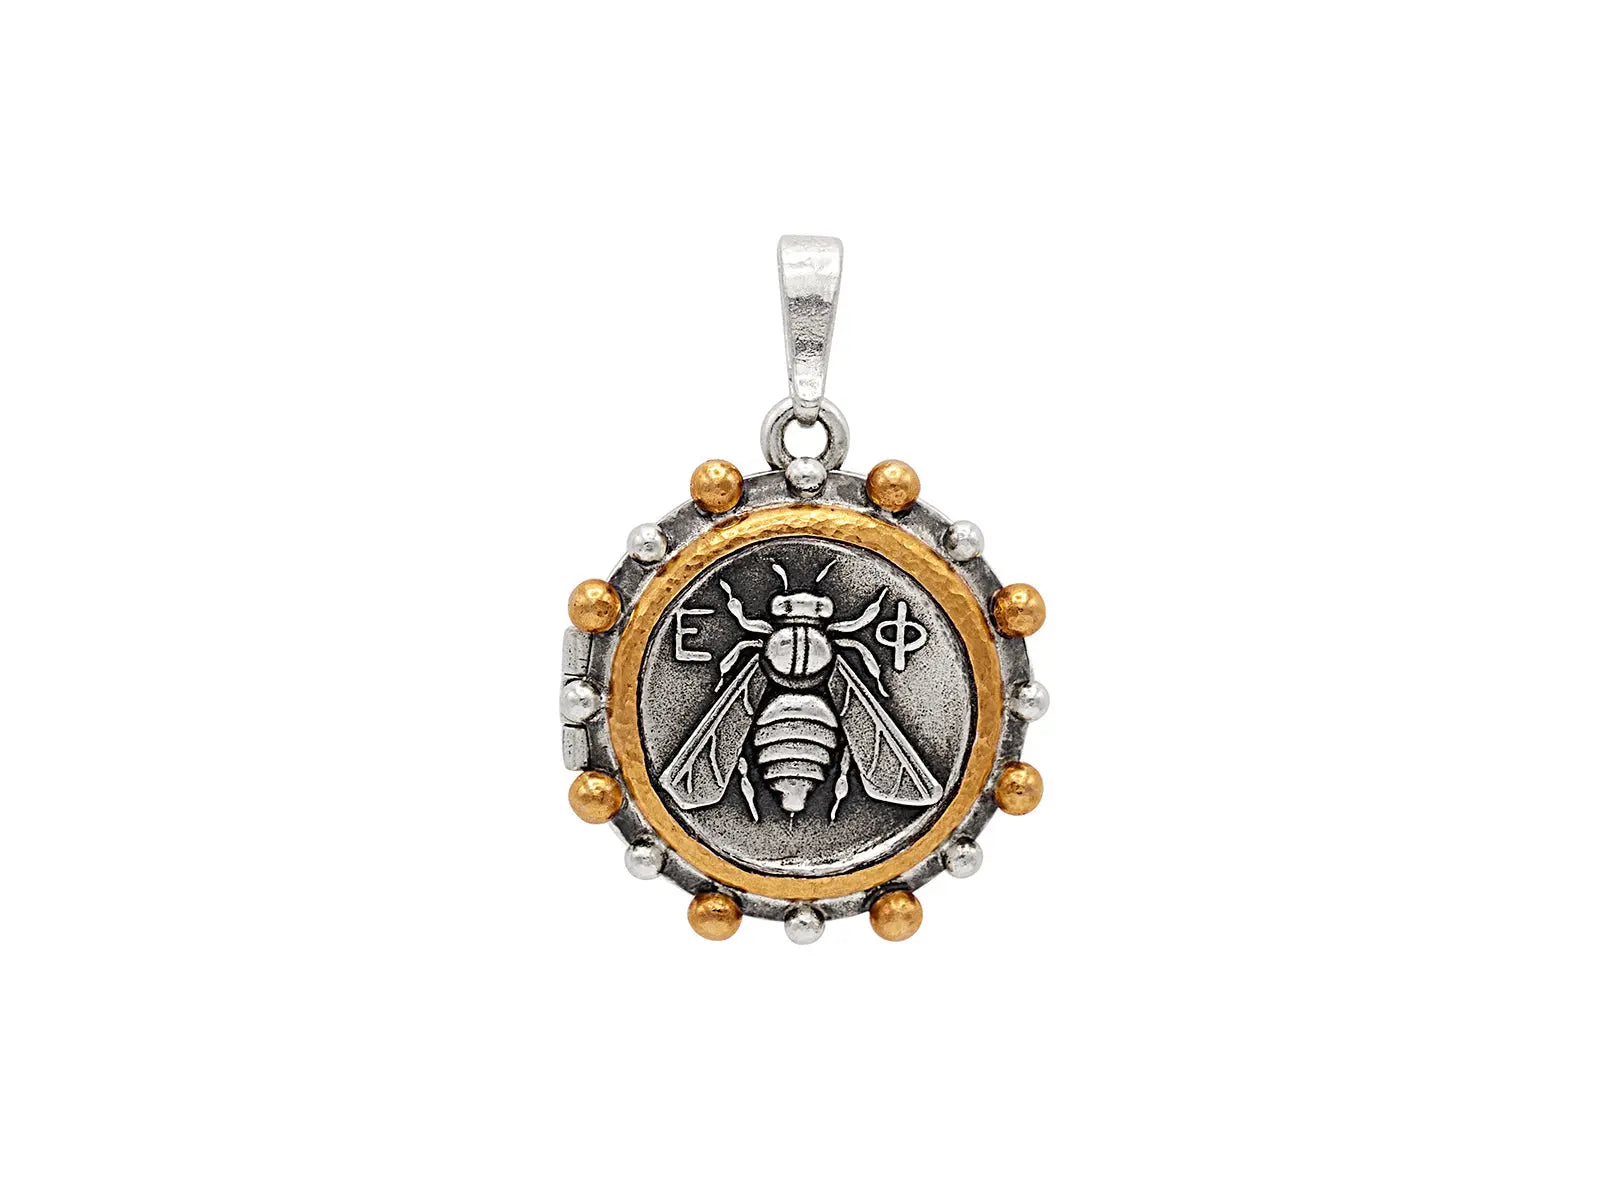 Bee Pendant in Sterling Silver with 24k Gold Bonded with Bee Emblem. The dimension is 39x27mm.  Designed by Gurhan